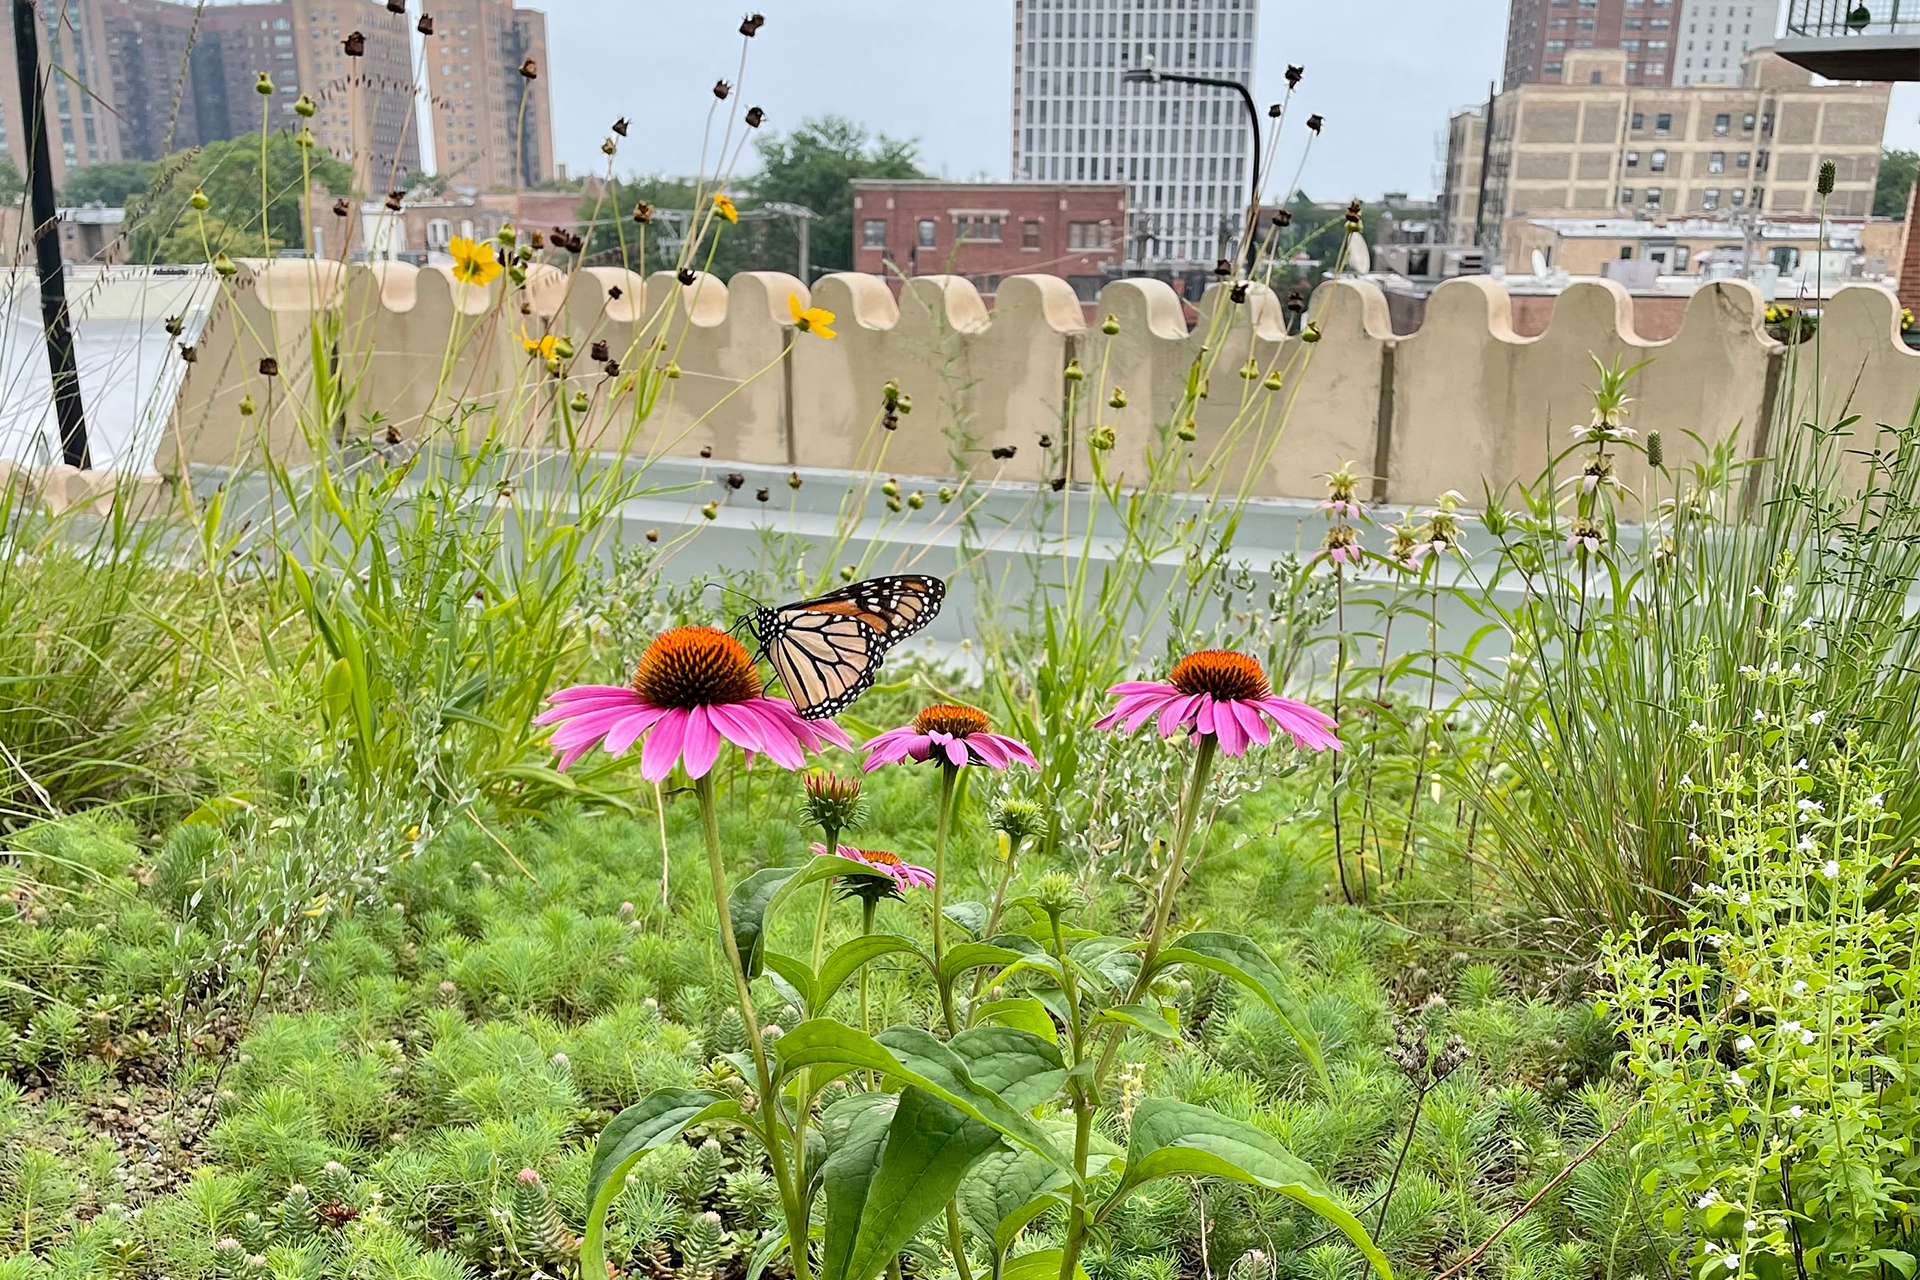 monarchs on flowers outside of an urban area goes to urban areas and greenspace working group page when clicked on